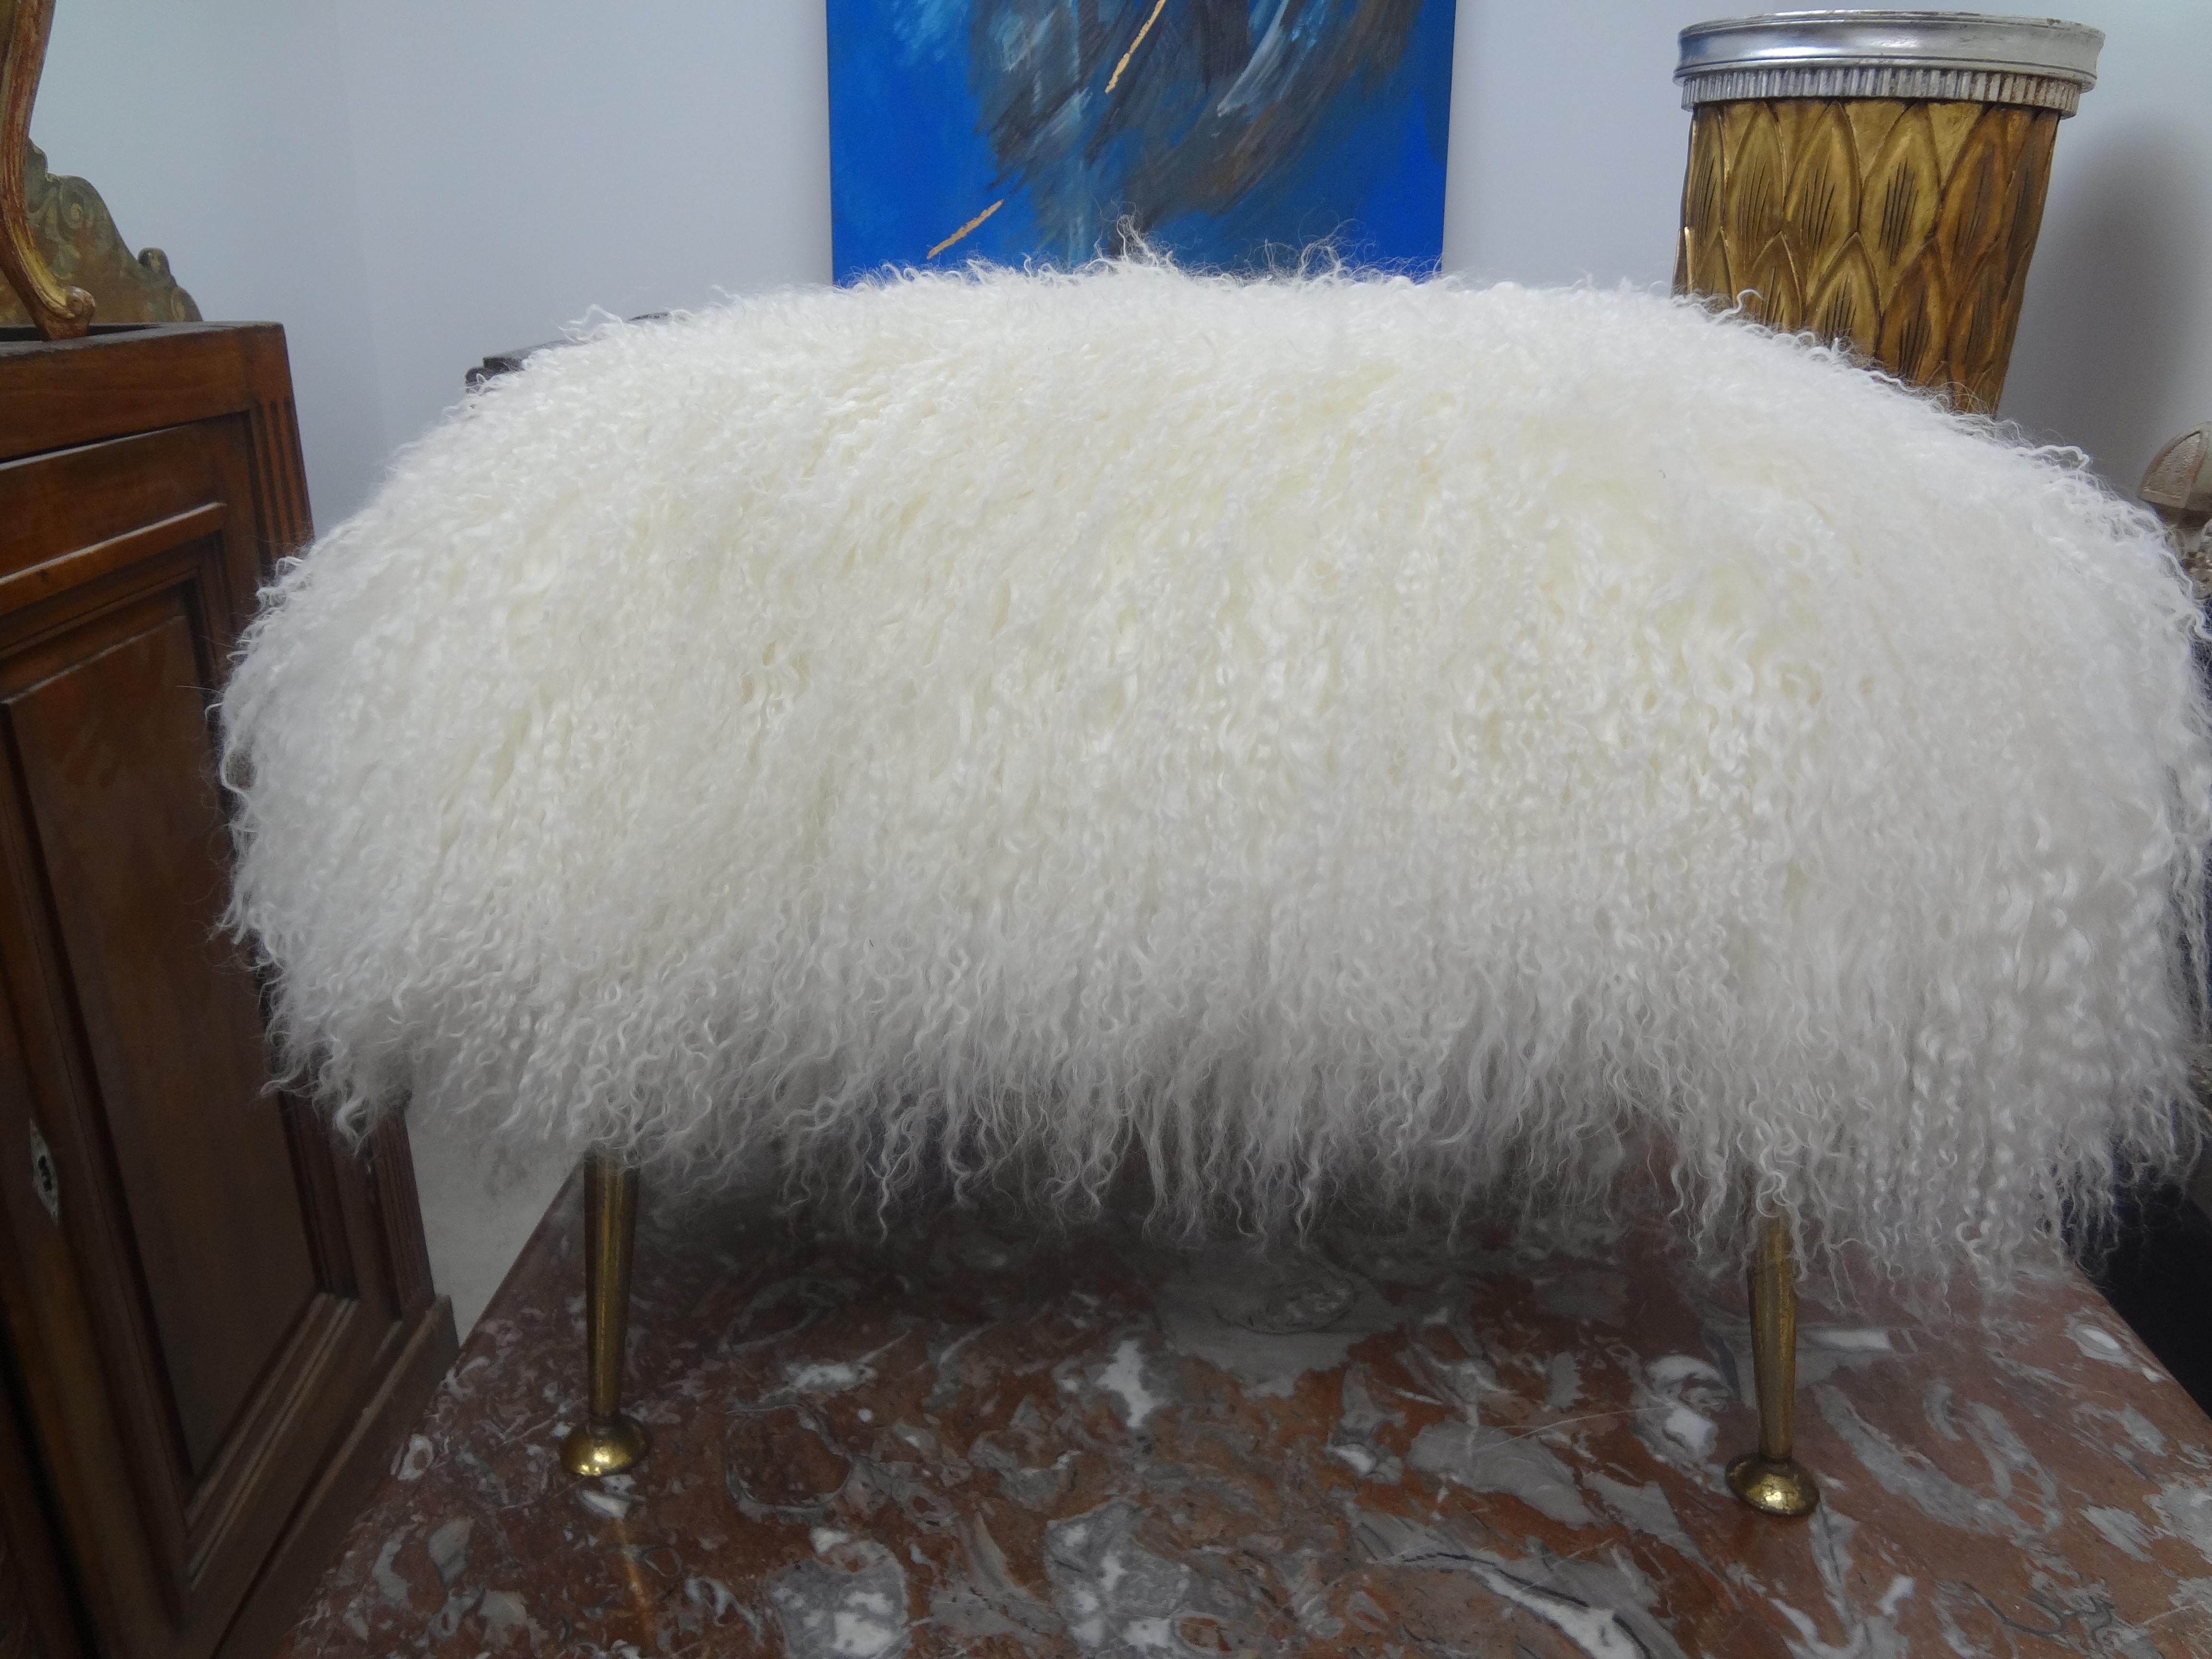 Italian Gio Ponti inspired ottoman, stool, poof or bench with splayed legs newly upholstered in white Mongolian lambs wool.